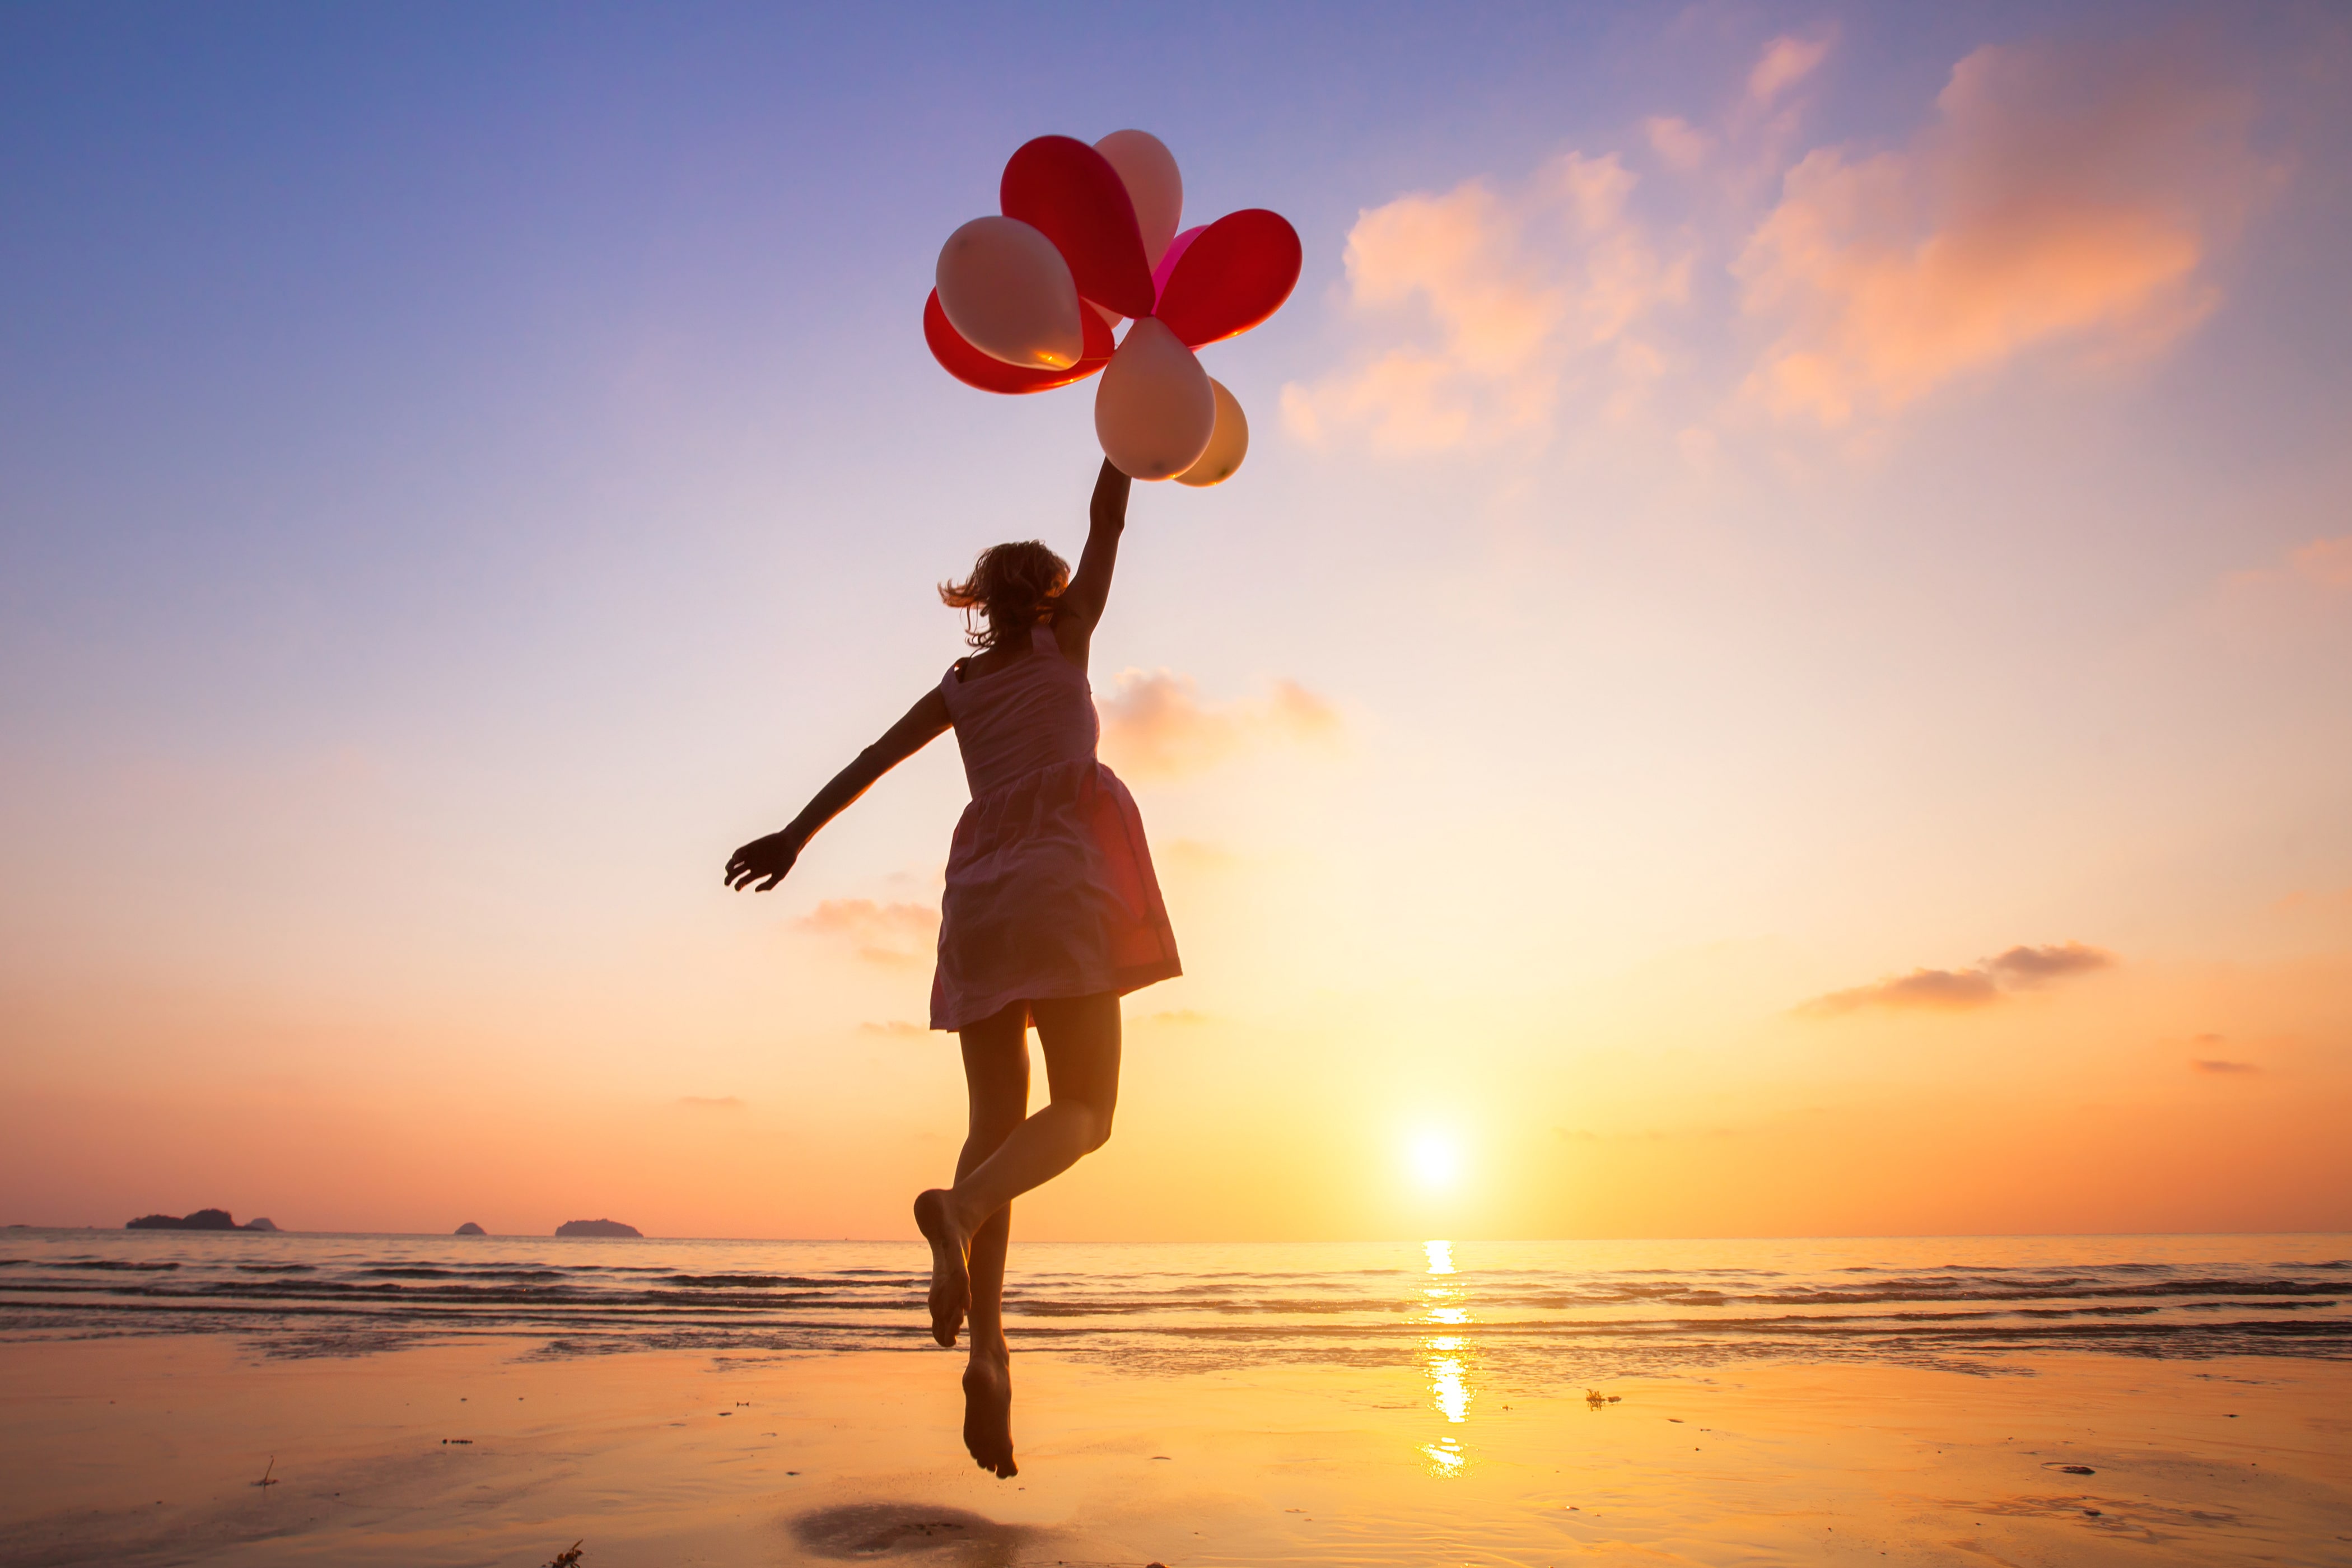 Image of a lady holding a handful of balloons as she floats above the sandy coastal beach at sunset.